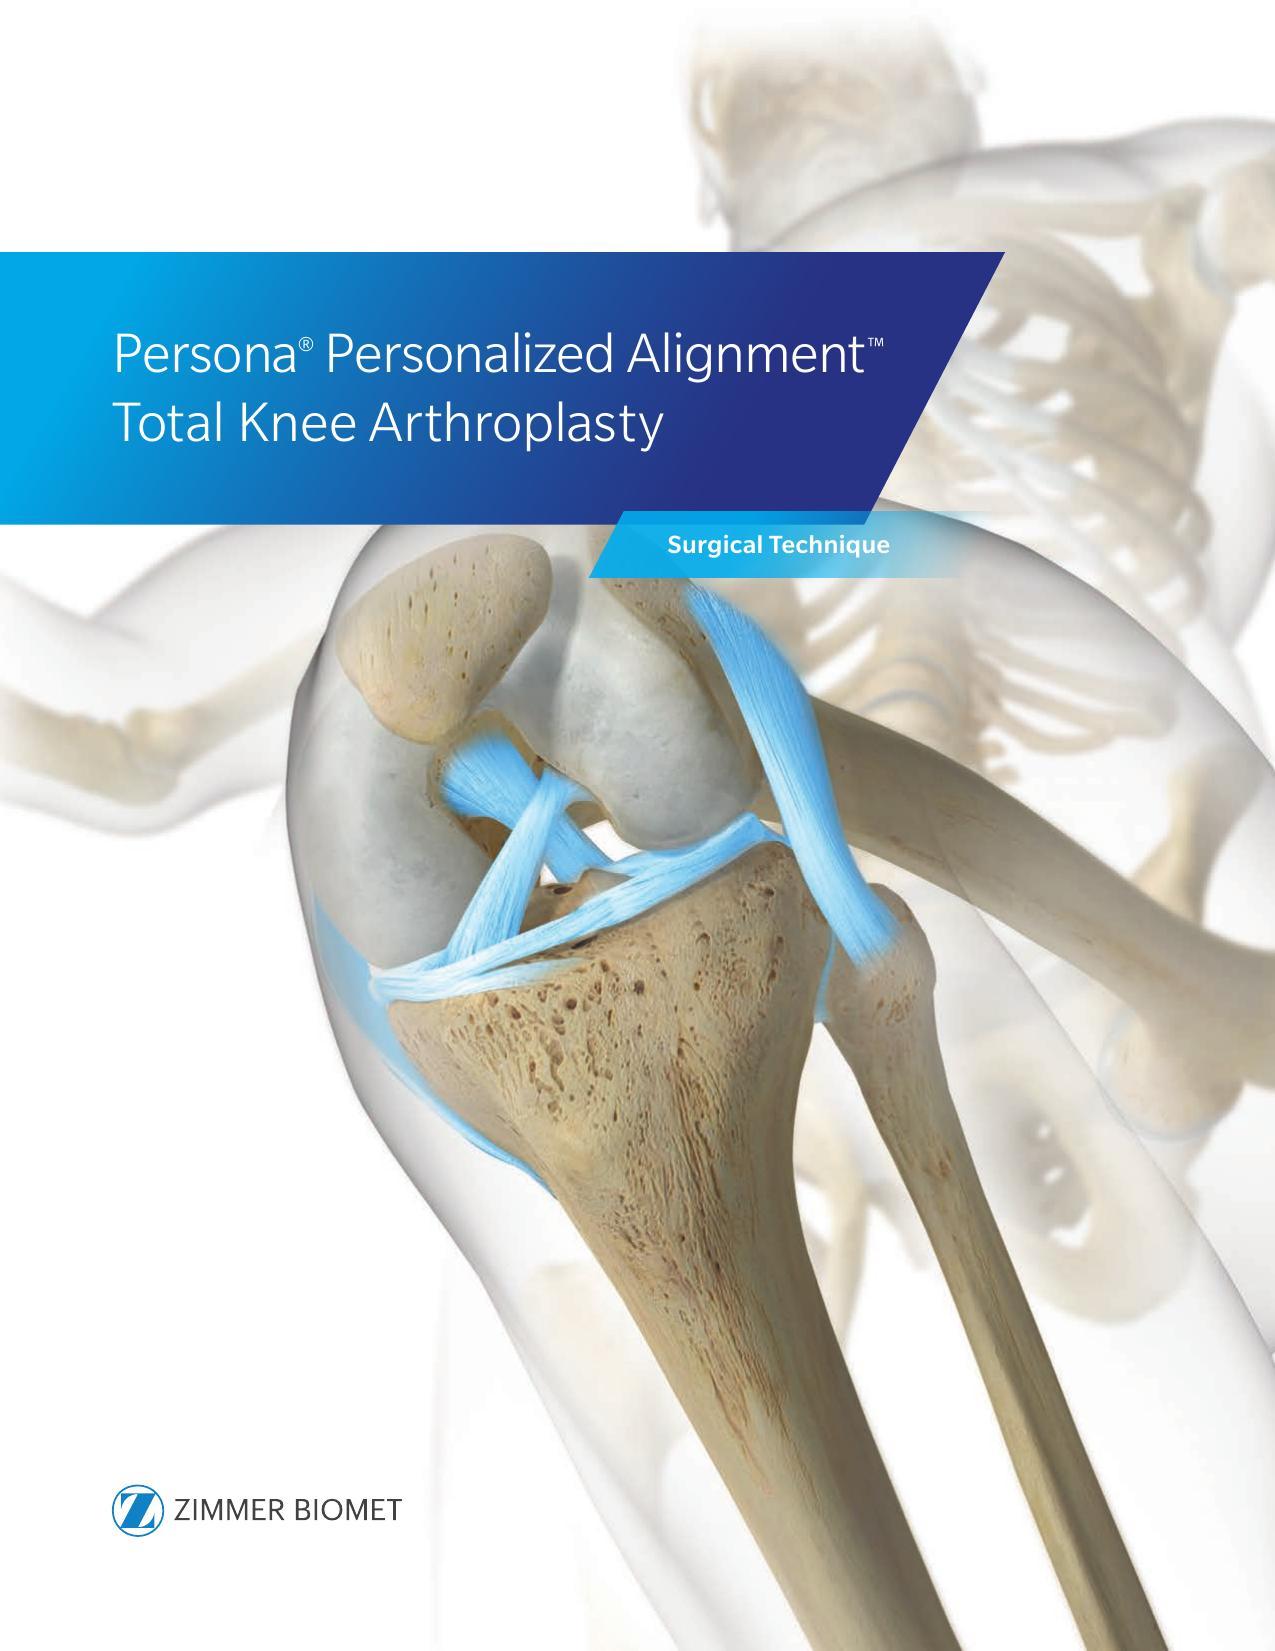 persona-personalized-alignment-total-knee-arthroplasty-surgical-technique.pdf